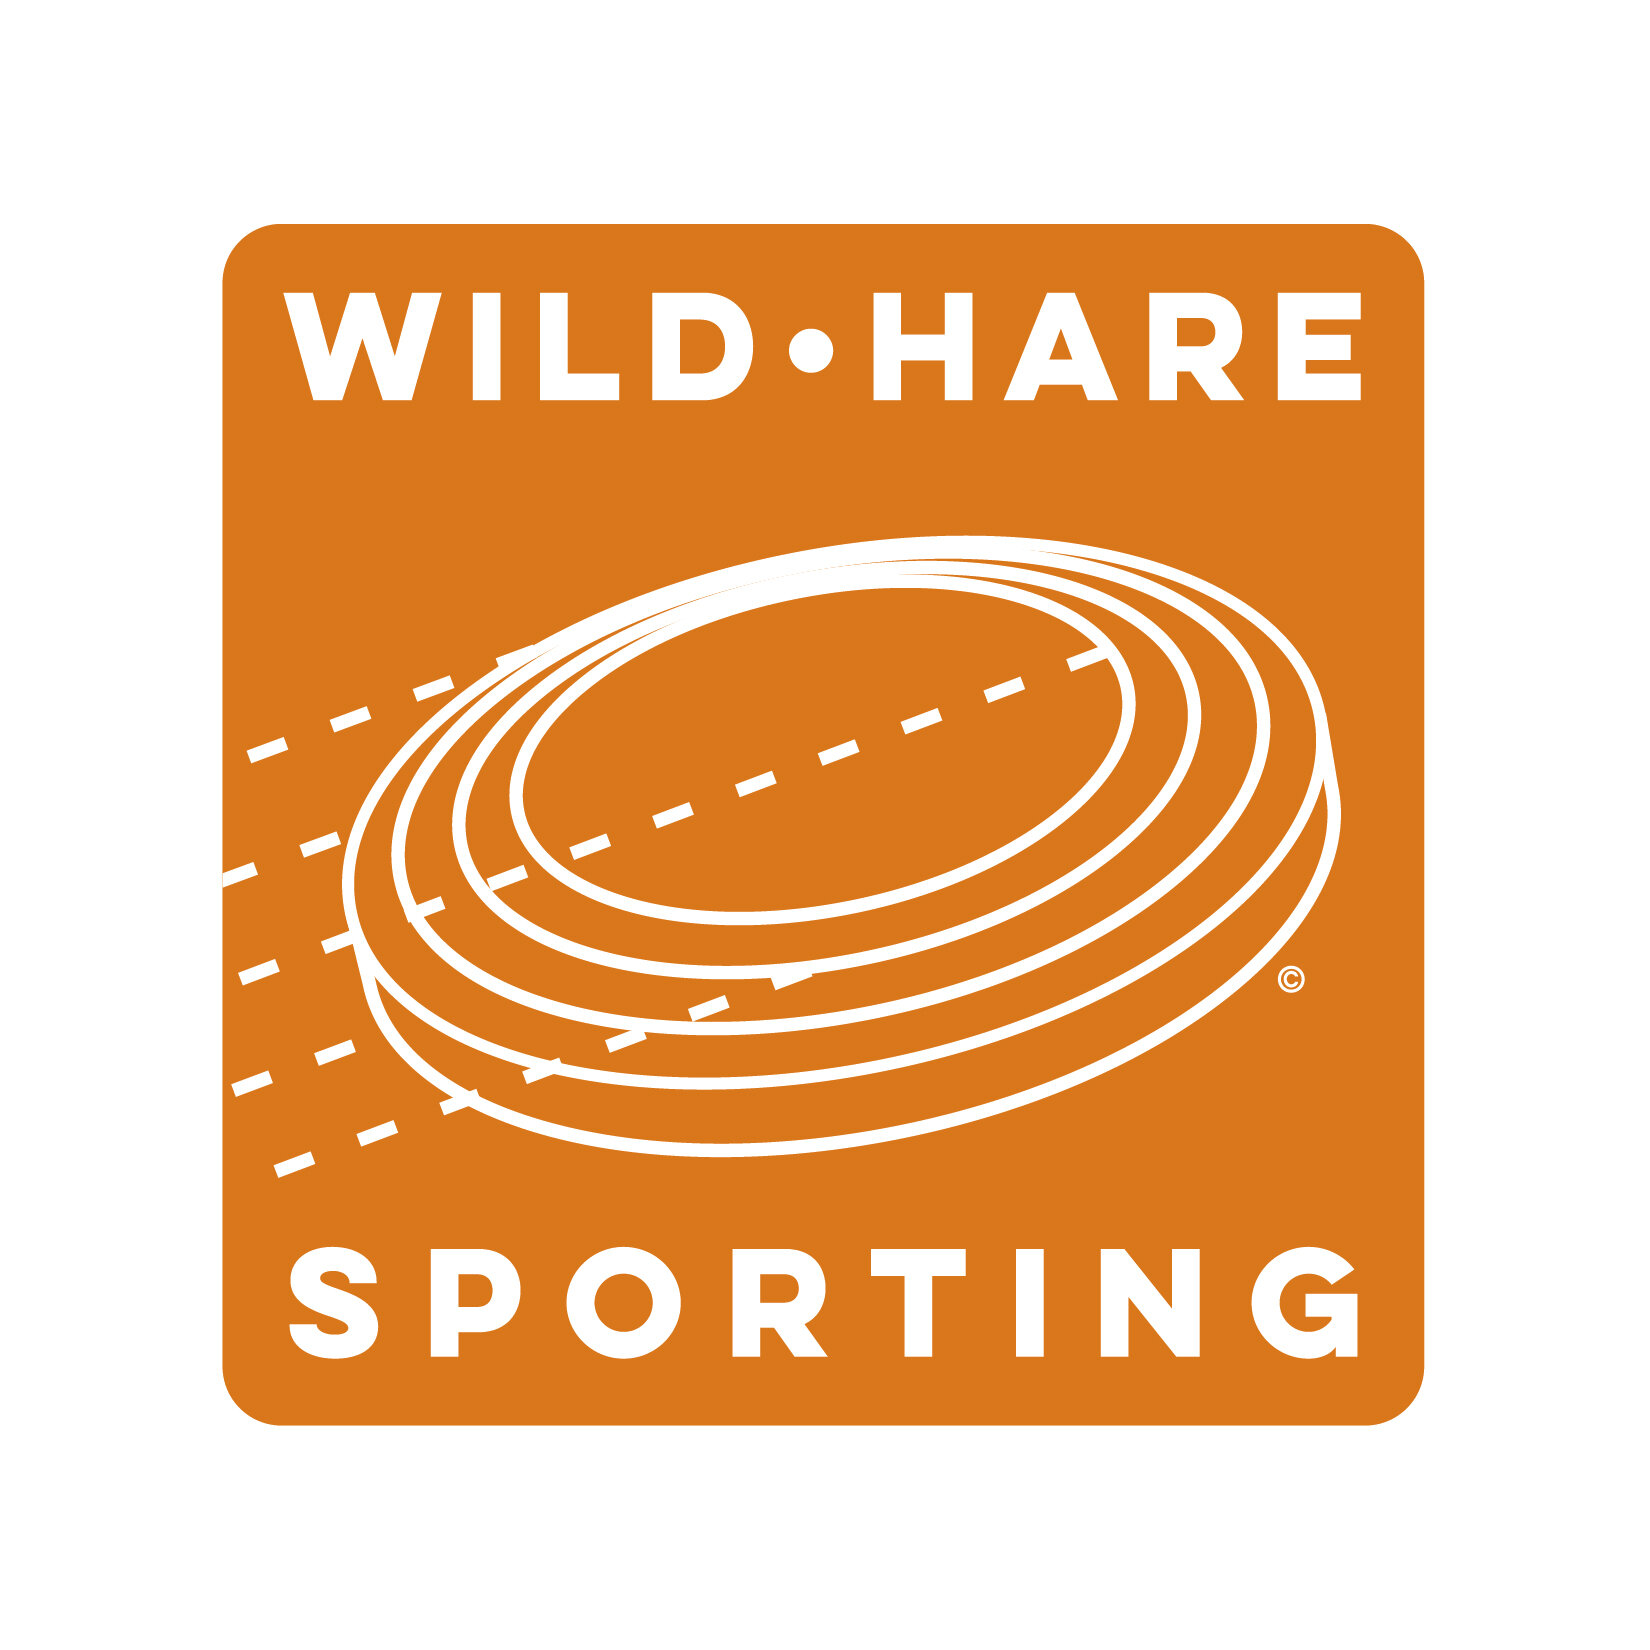  Wild•Hare International Sporting logo  Design, illustration, branding and creative direction by Chuck Mitchell 